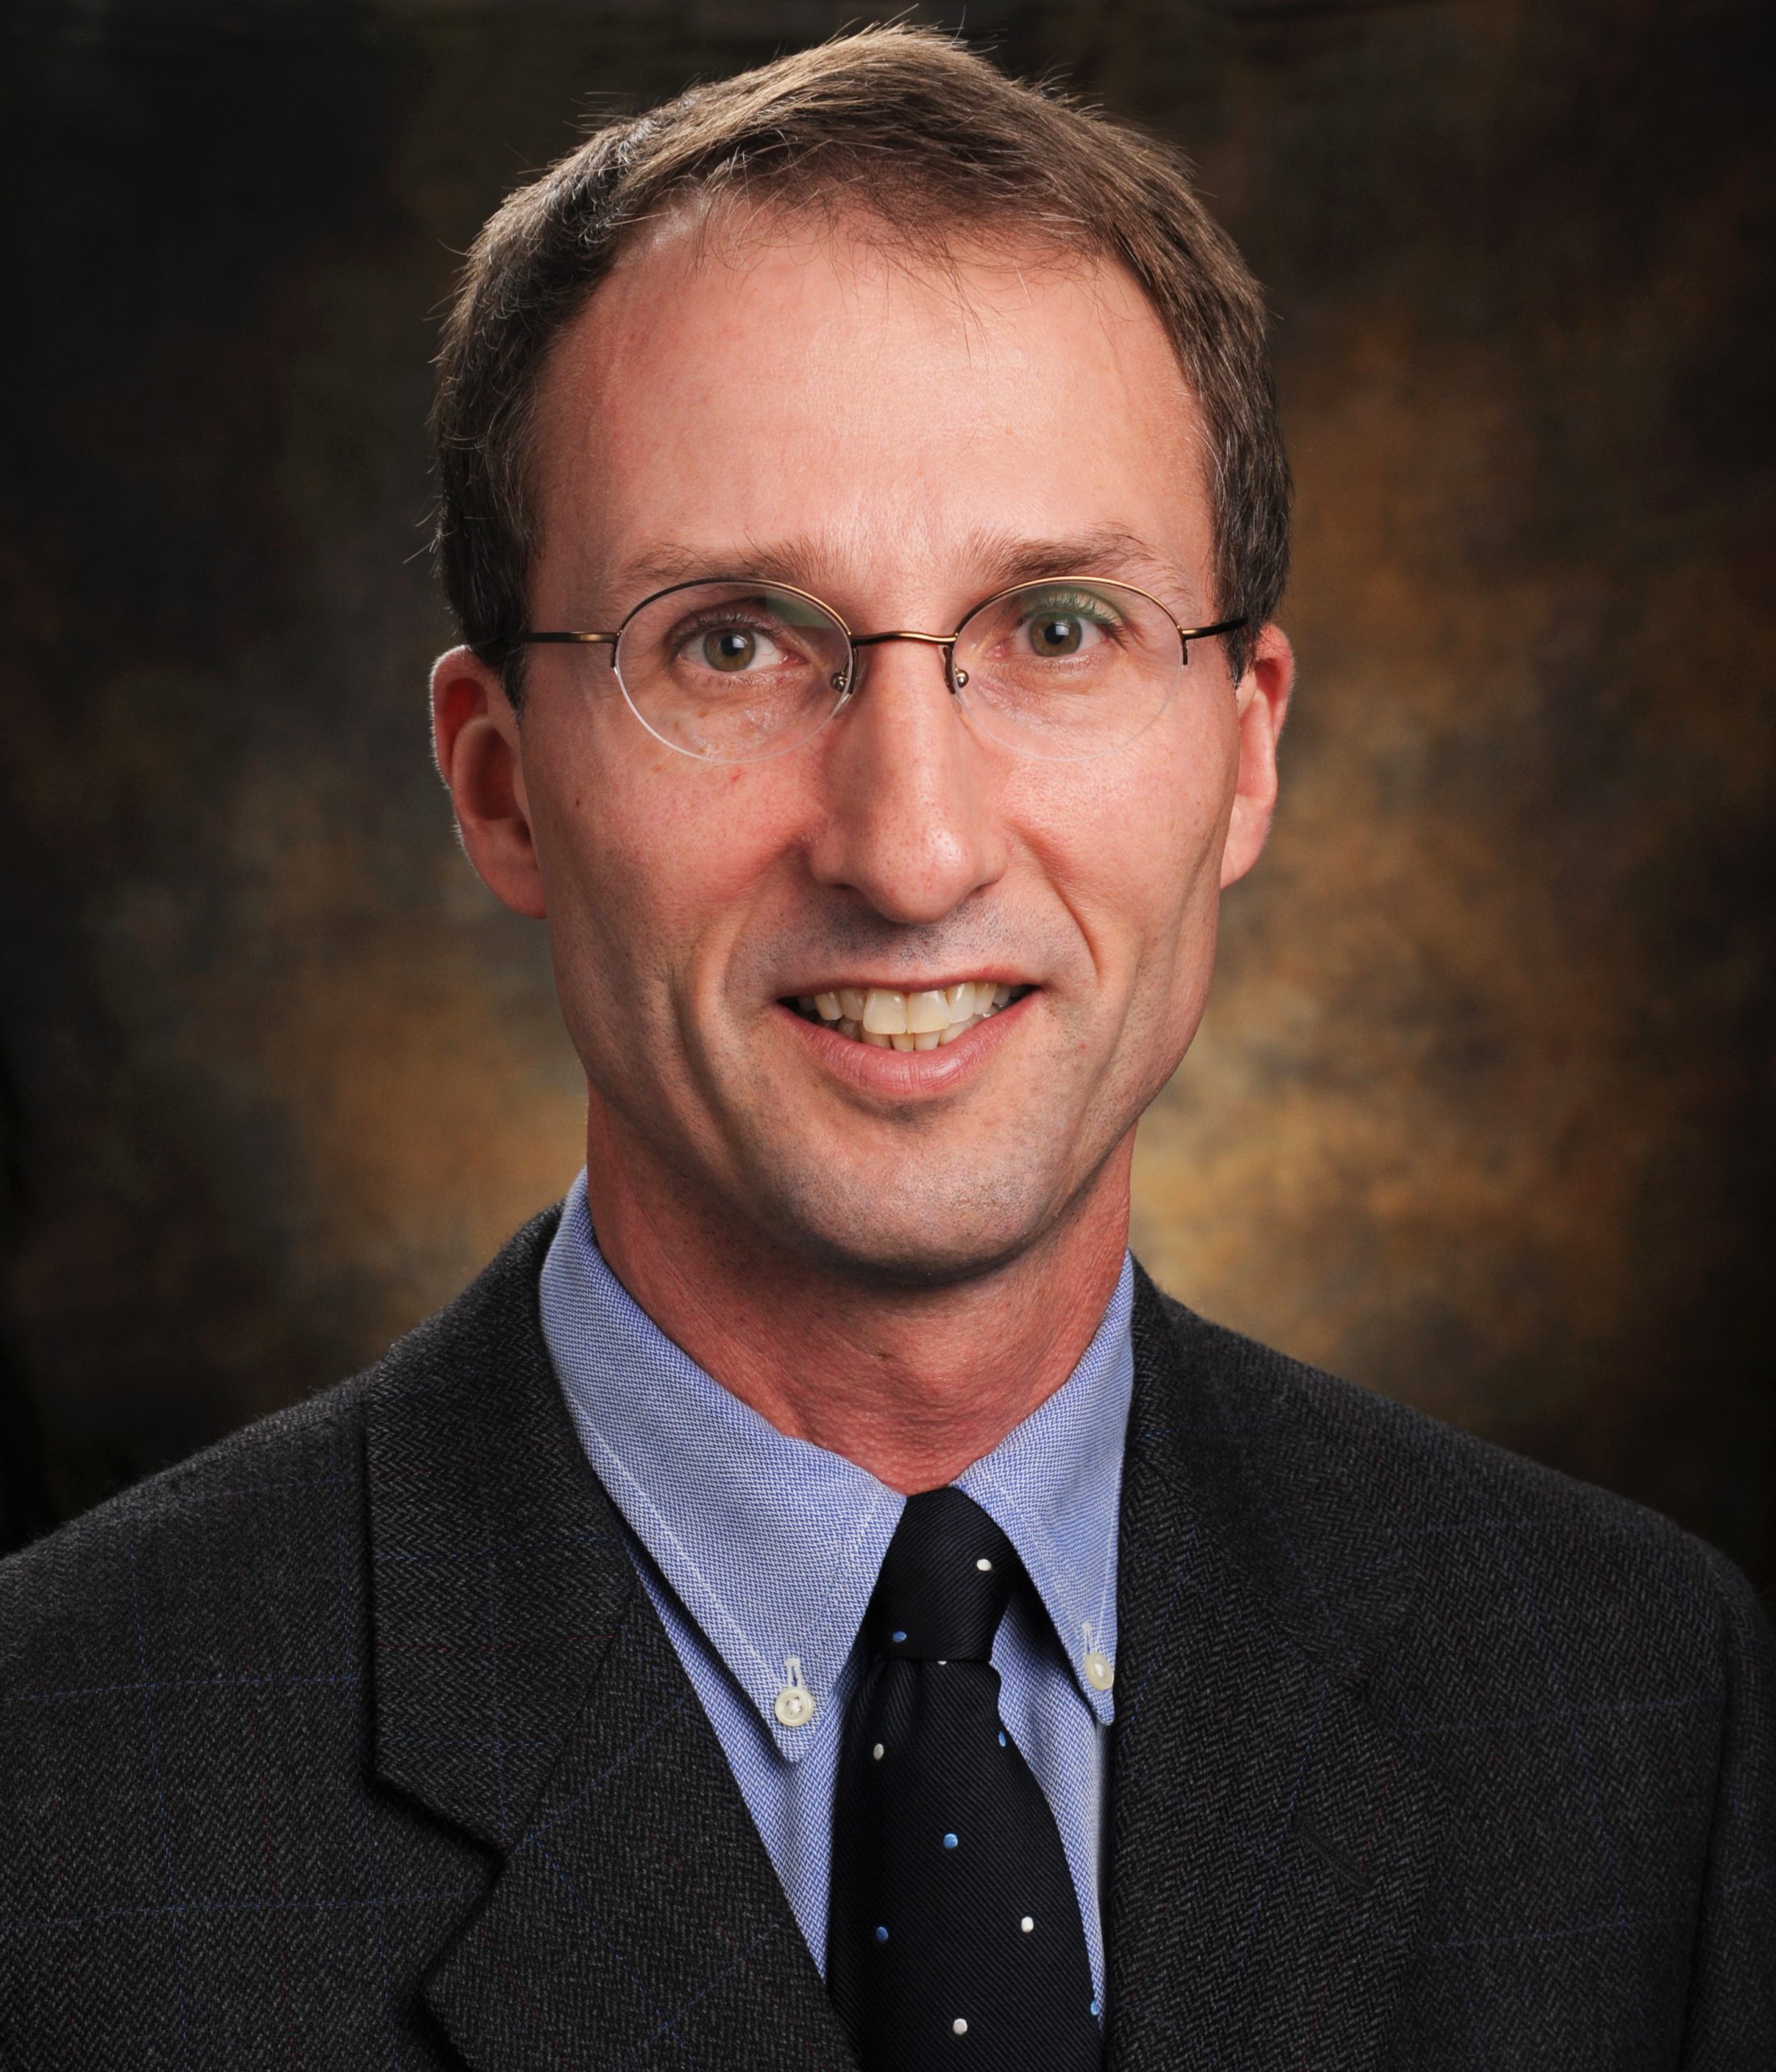 Professional photo of Dr. Joey English, a Caucasian male wearing a dark suit and tie.